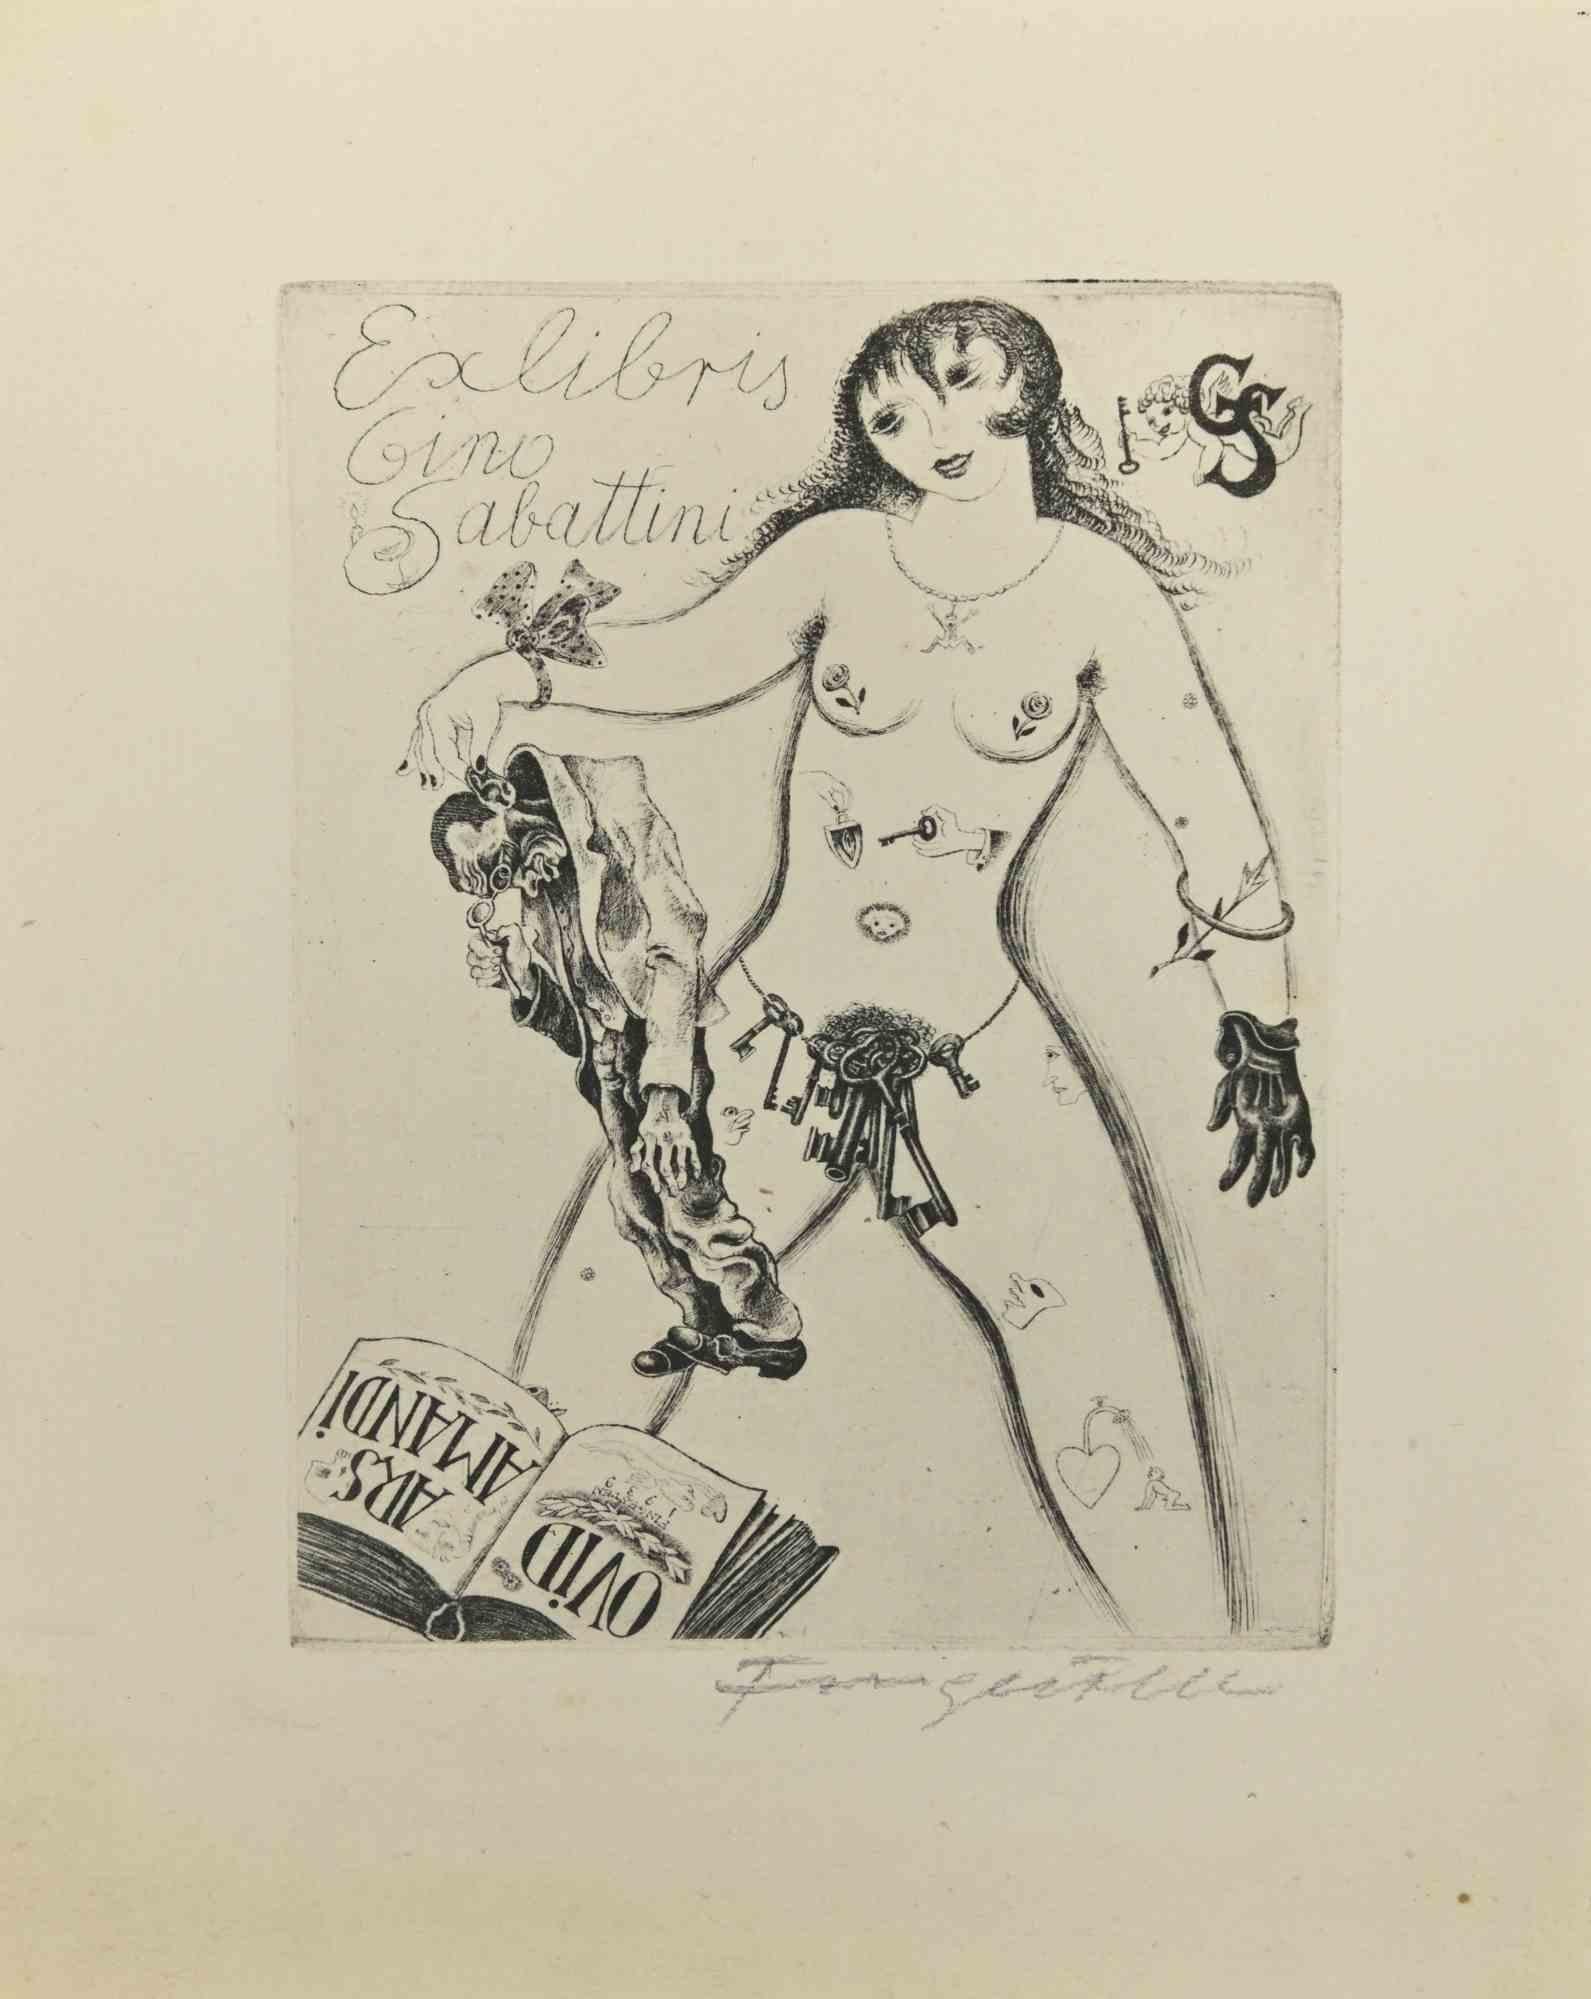 Ex Libris - Gino Sabattini is an Etching print created by  Michel Fingesten.

Hand signed on the lower margin.

Good conditions except some foxings that doesn't affect the immage.

Michel Fingesten (1884 - 1943) was a Czech painter and engraver of